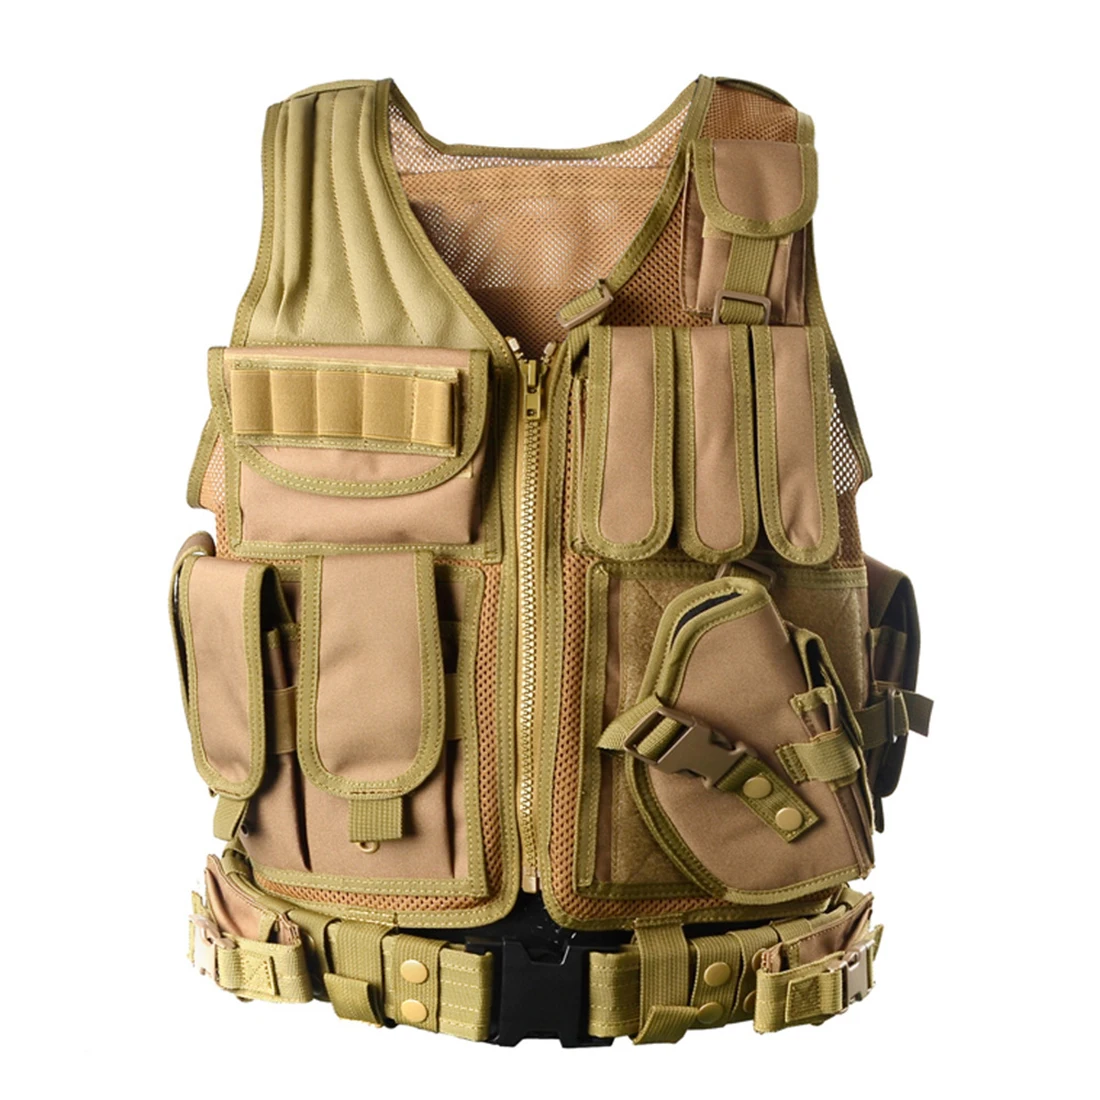 

Tactical Military Vest Field Operations Mens Tactical Hunting Vests Army Adjustable Armor Outdoor CS Training Vest Airsoft Tan